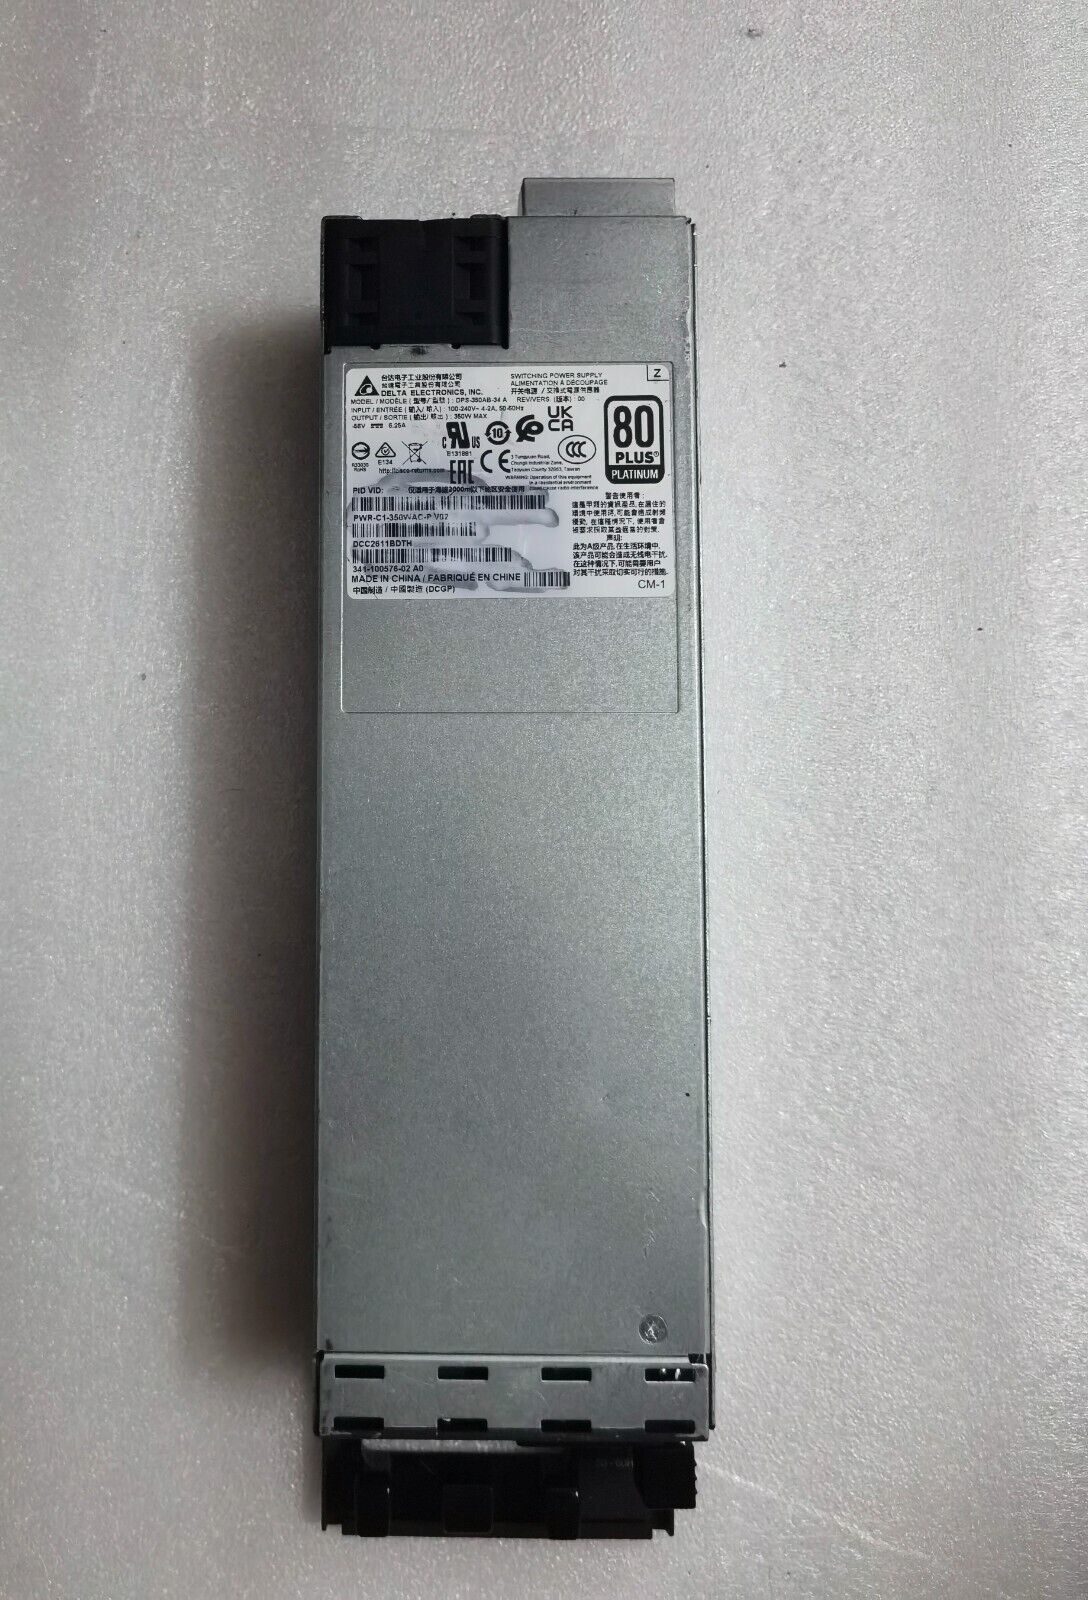 Cisco PWR-C1-350WAC-P 341-100576-02 Power supply for 9300 SWITCH